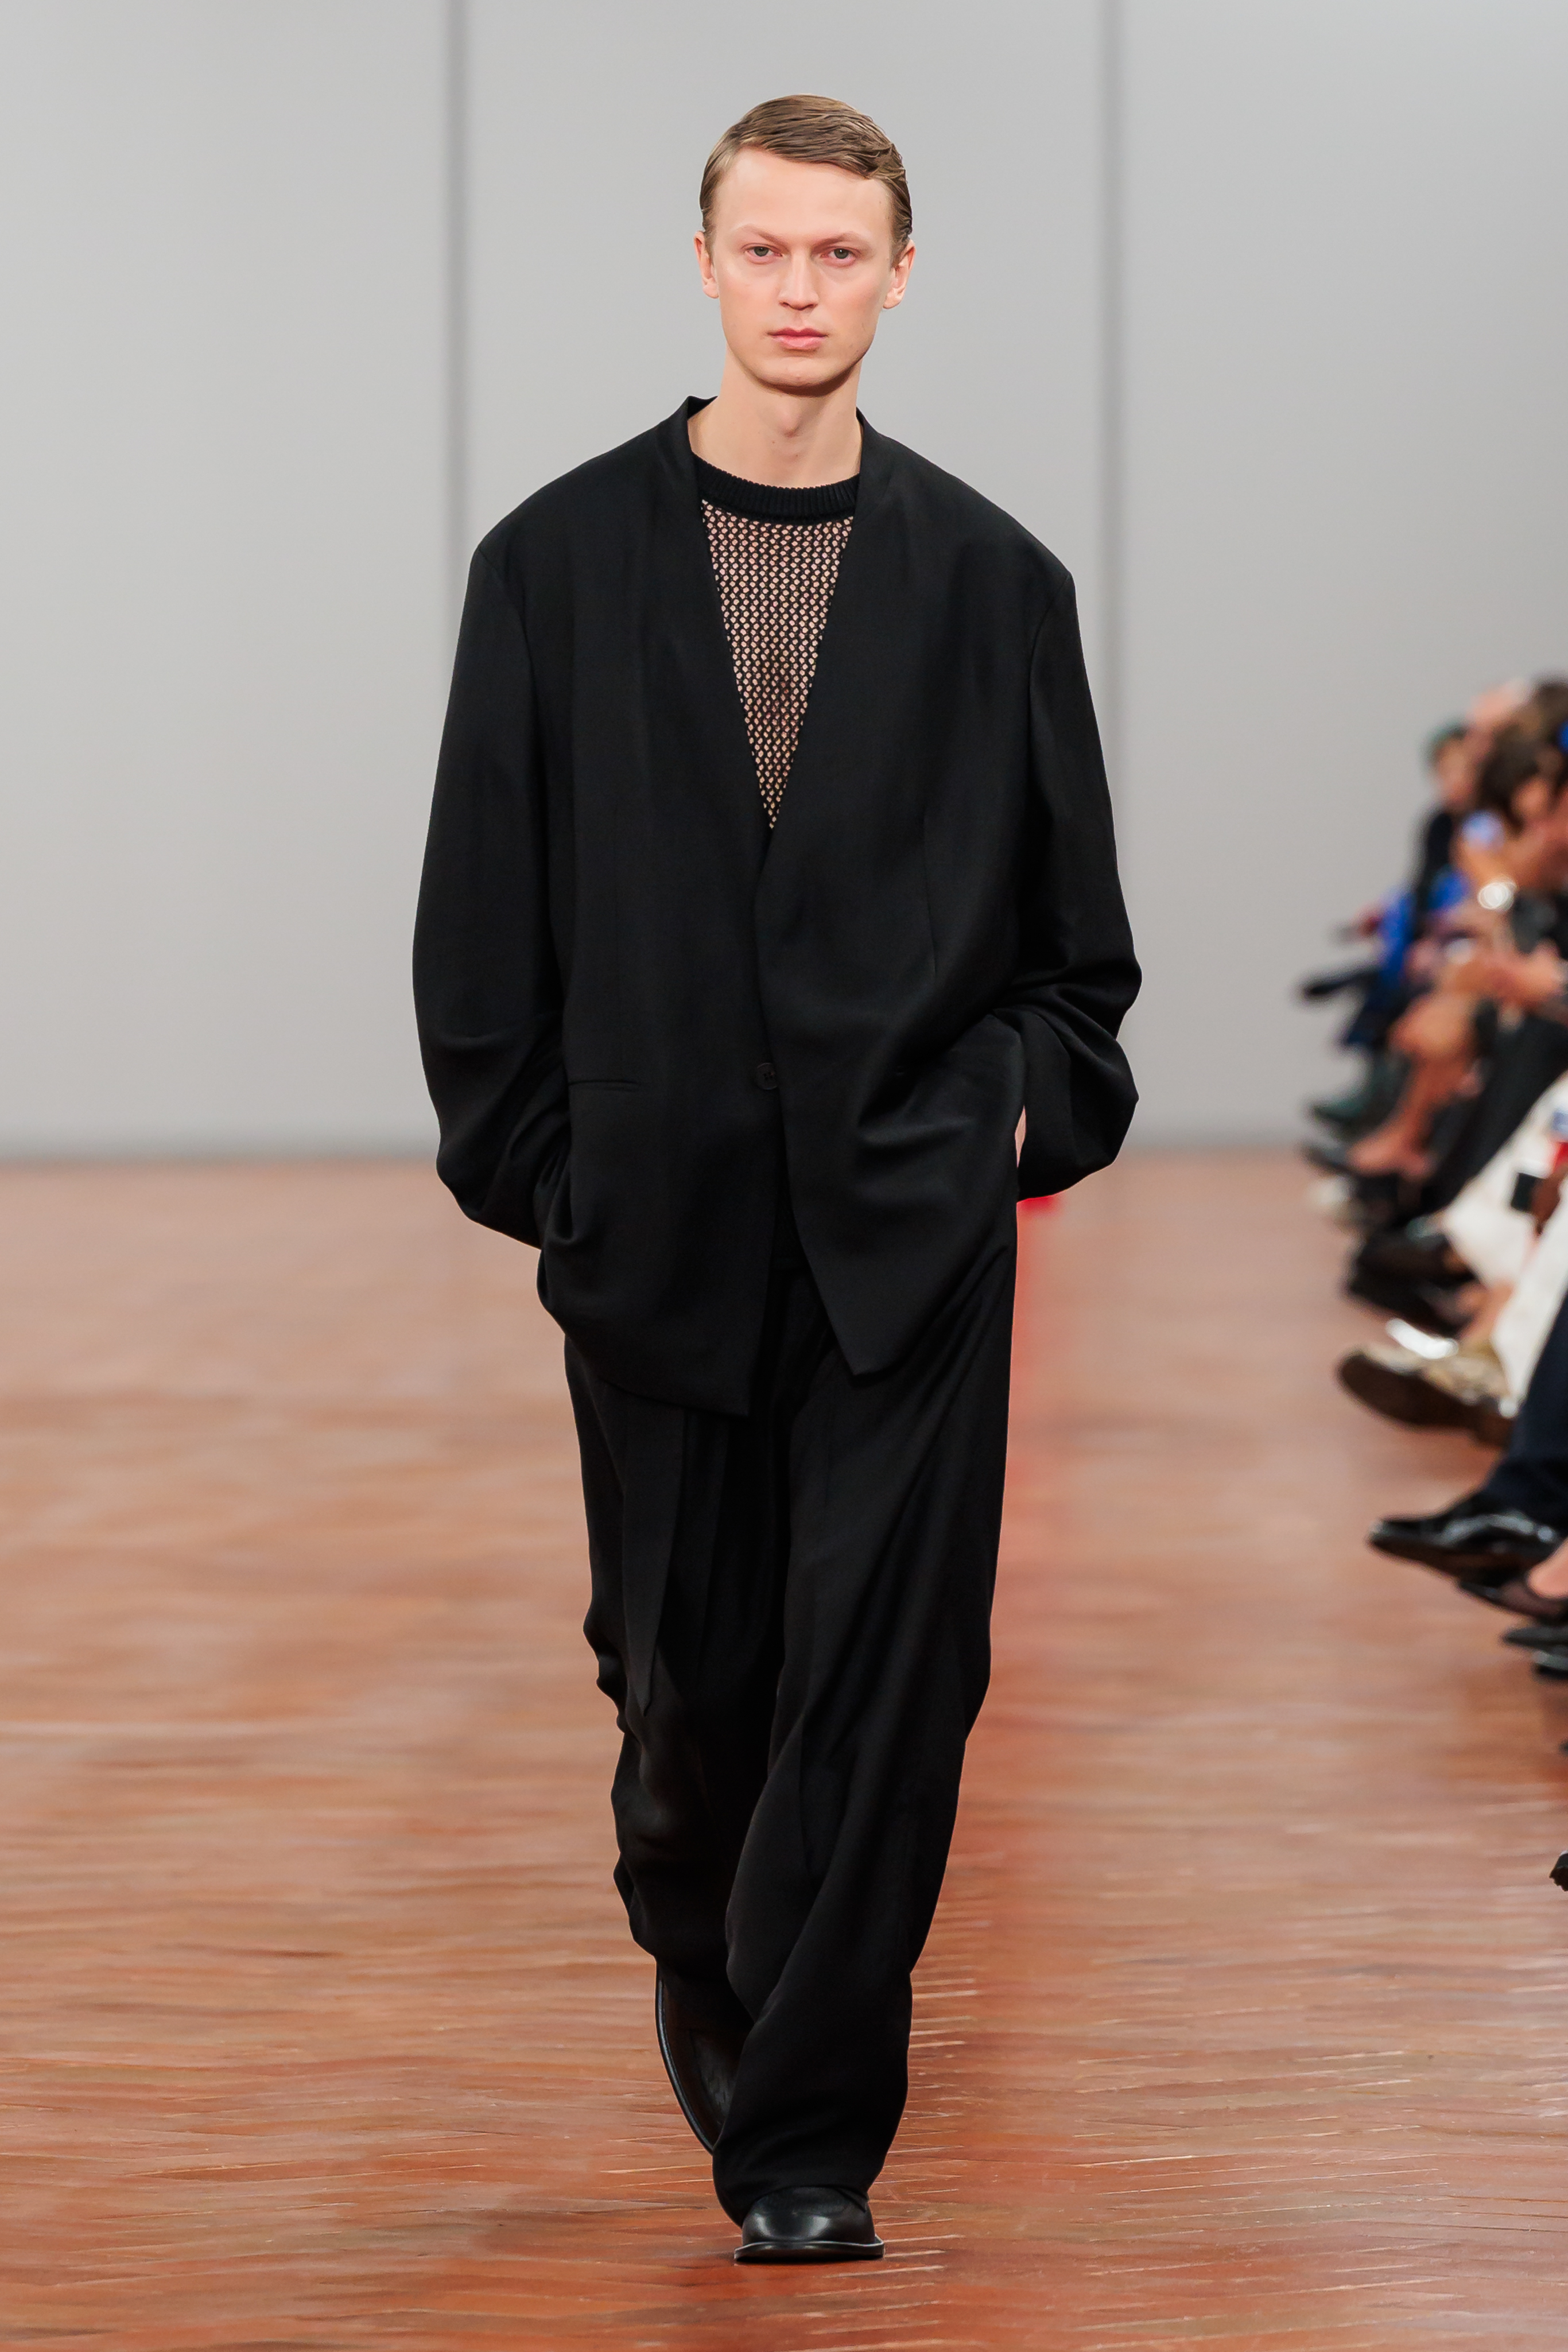 Model on runway in oversized black shirt, sheer mesh top, and wide-leg trousers